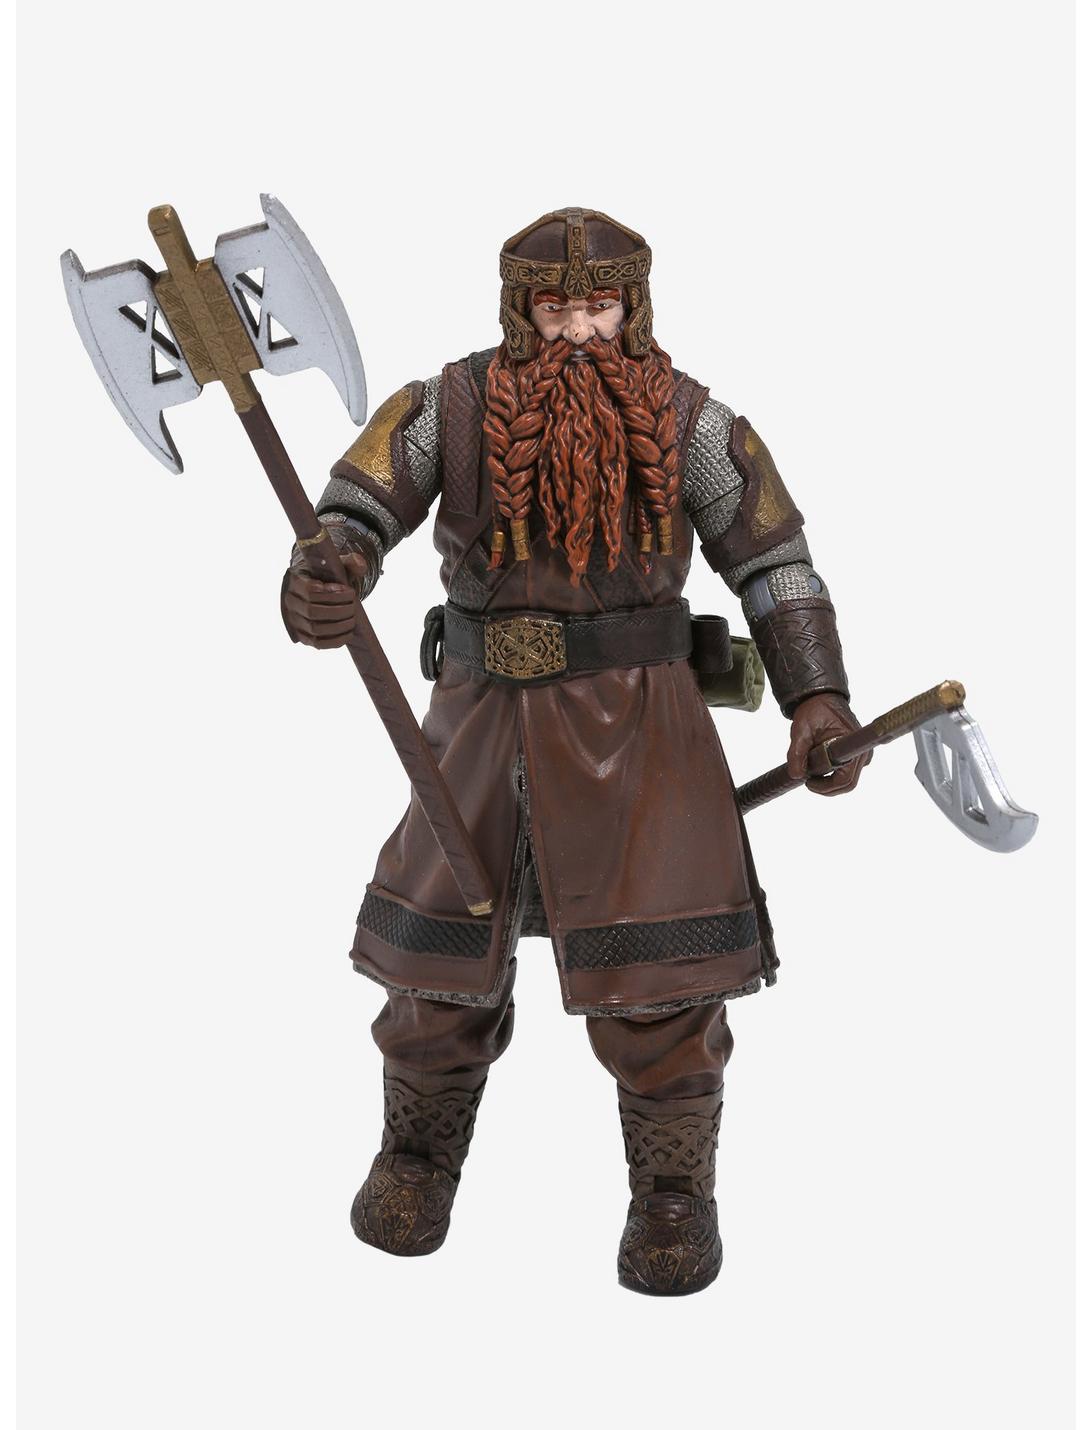 Diamond Select Toys The Lord of the Rings Deluxe Action Figure Gimli Figure, , hi-res